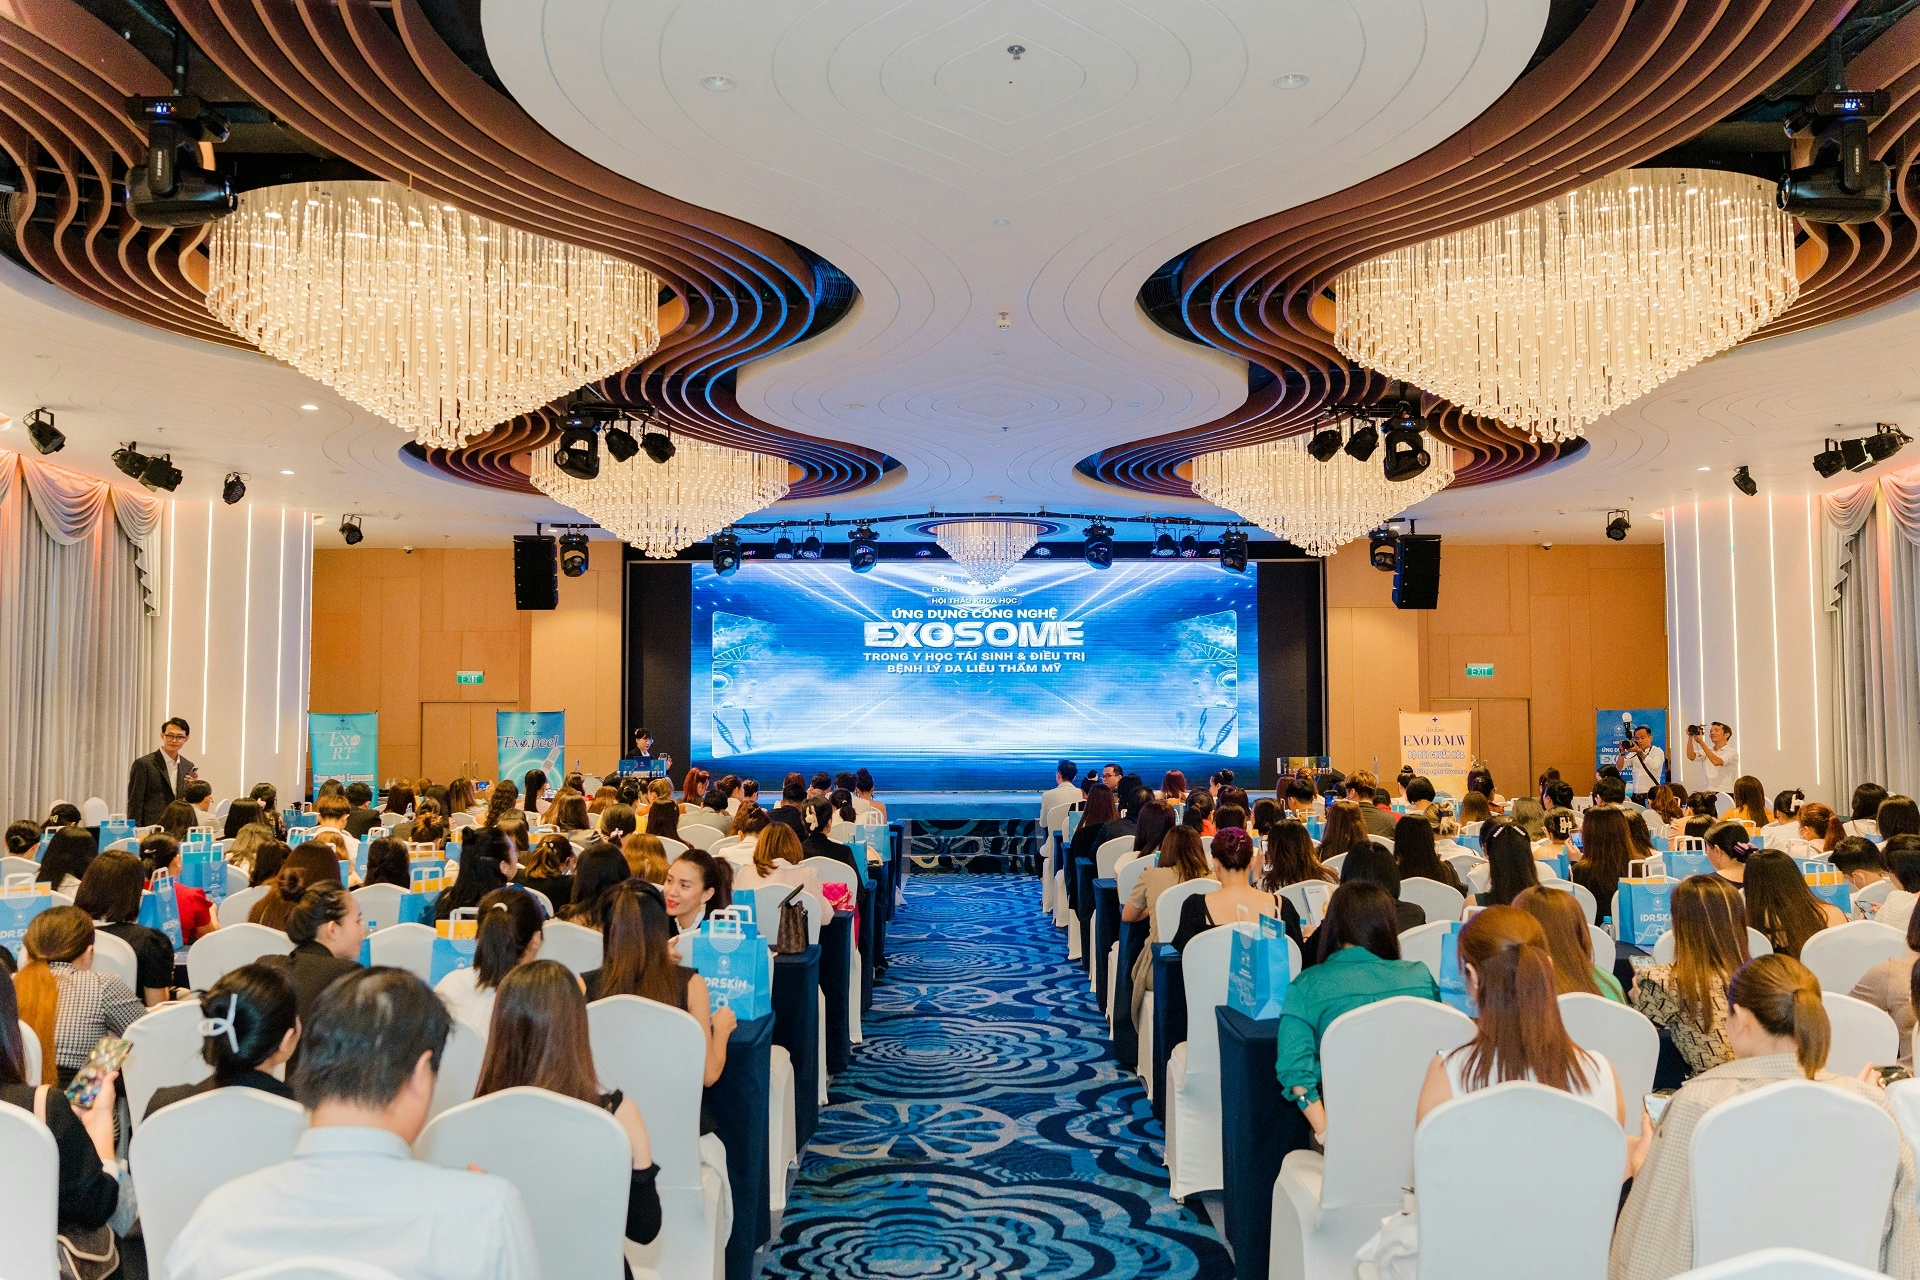 SALLY BEAUTY COMPANY ORGANIZED A SCIENTIFIC WORKSHOP ON EXOSOME TECHNOLOGY IN DERMATOLOGICAL AESTHETICS